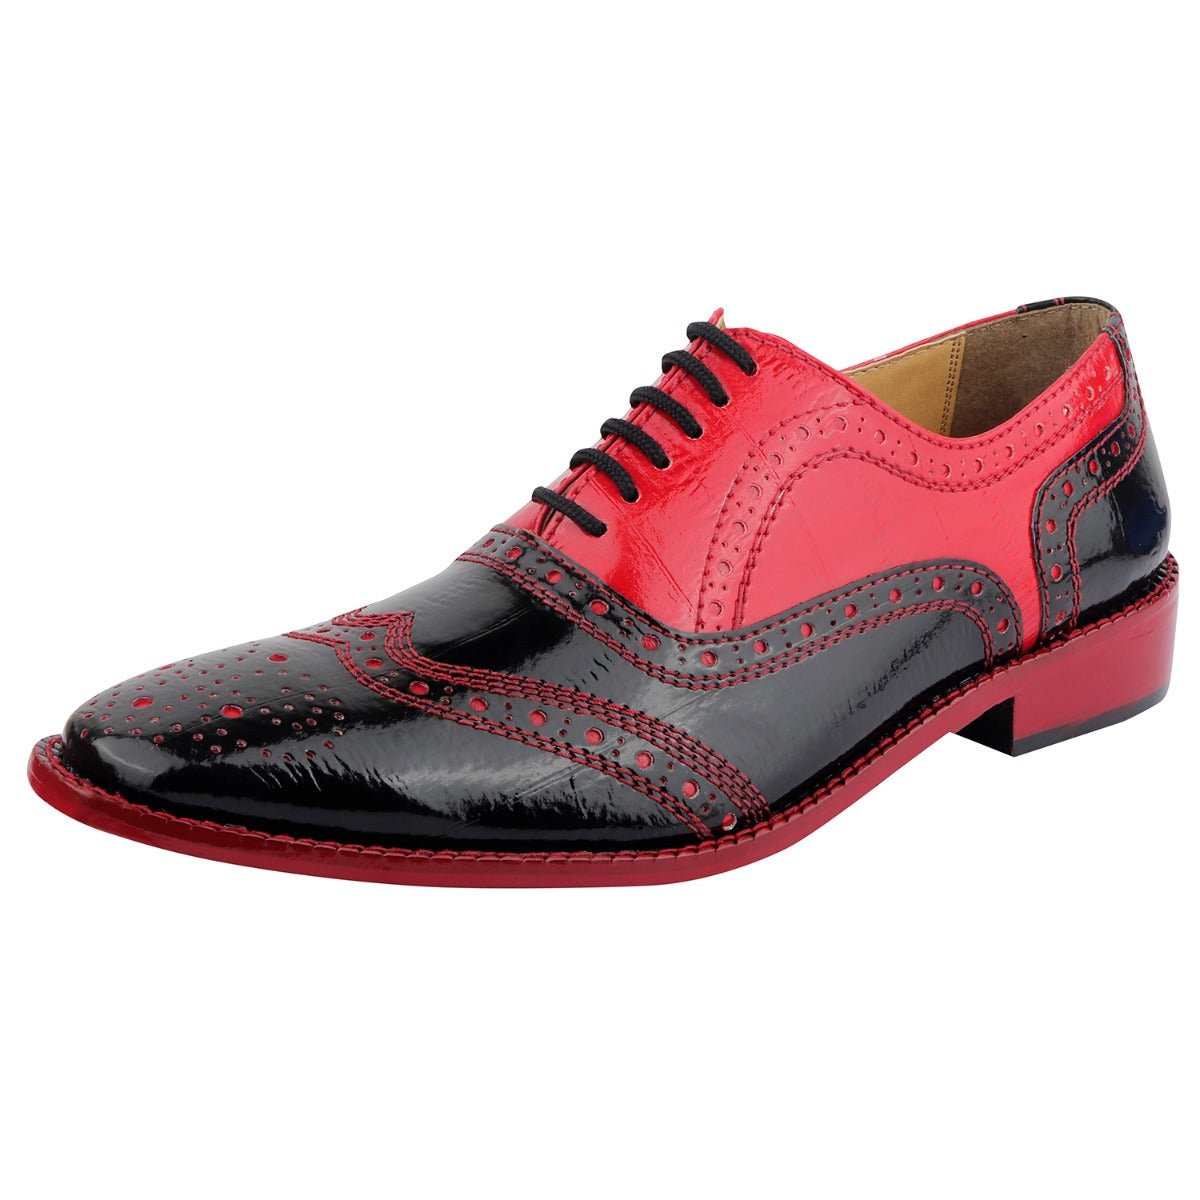 Tremont Genuine Leather Oxford Style Two Toned Shoes with EEL Printed ...